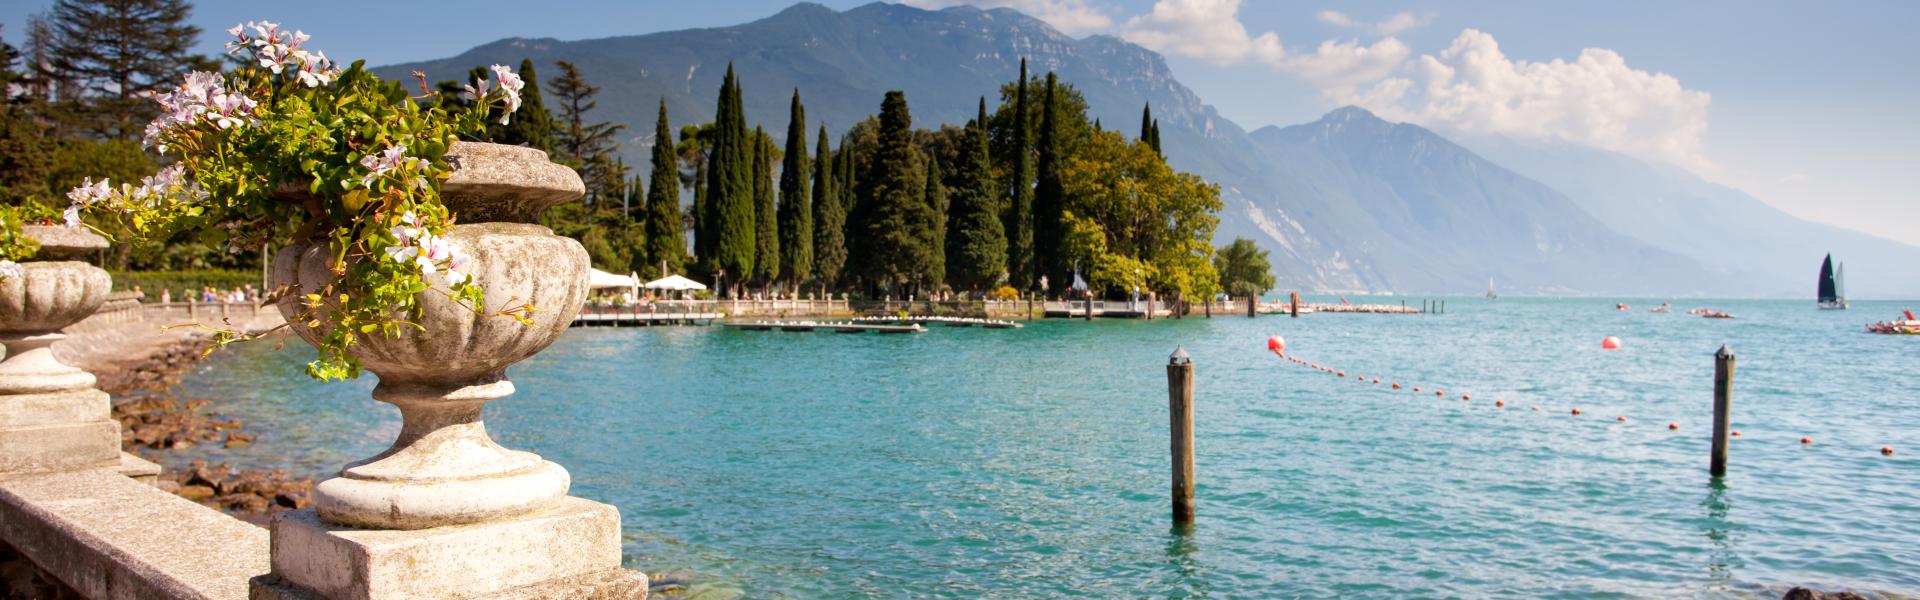 View on the bay of Riva del Garda and mountains in background, Lake Garda, Italy.